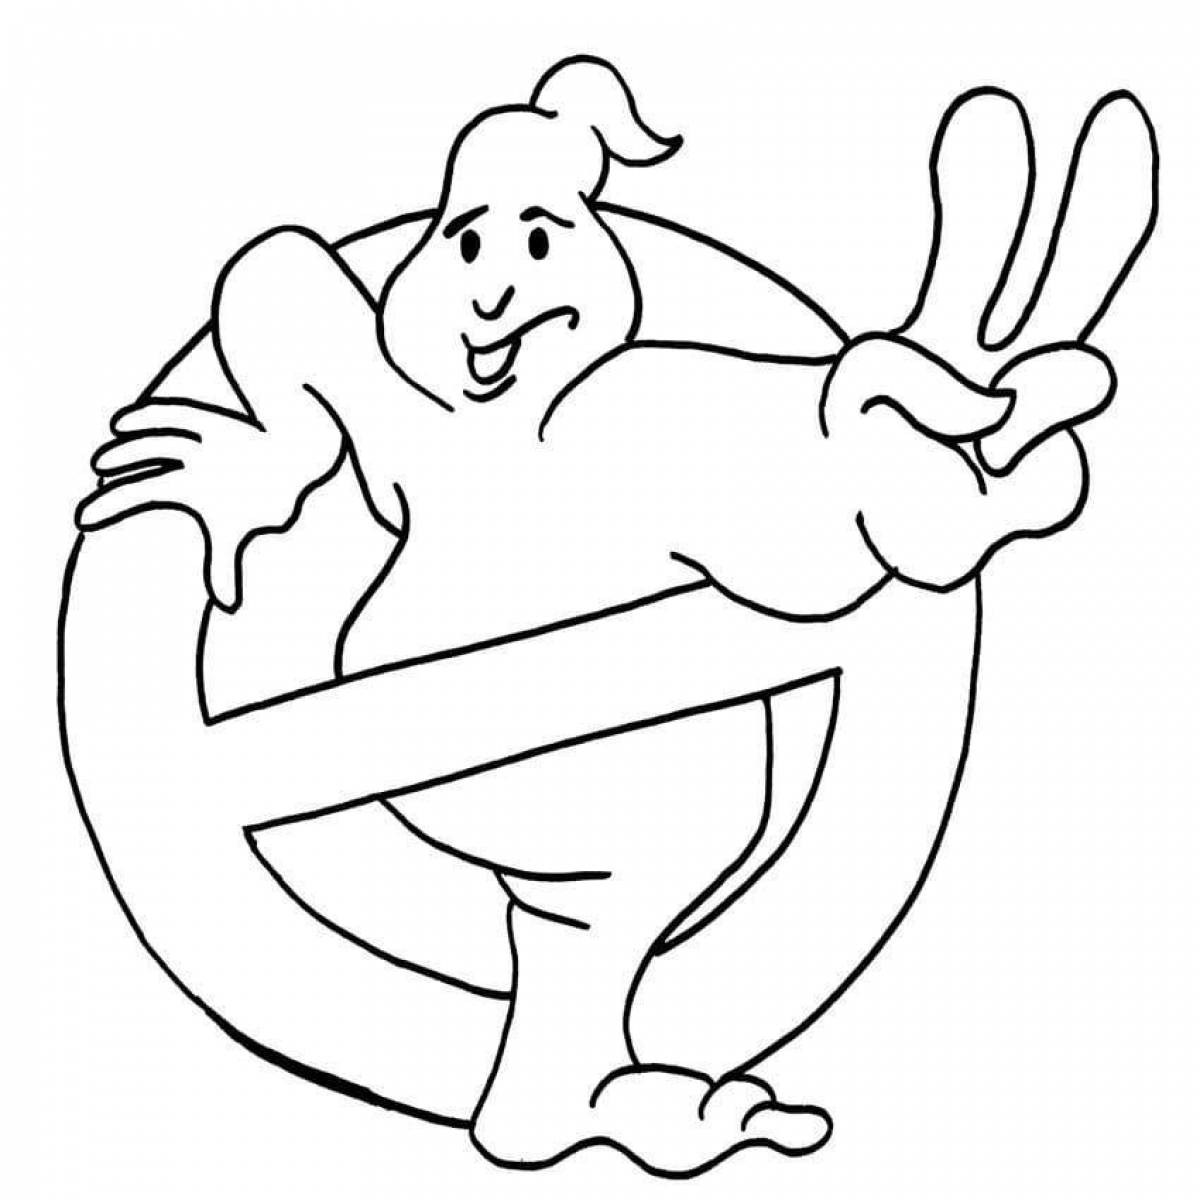 Fancy Ghostbusters coloring page